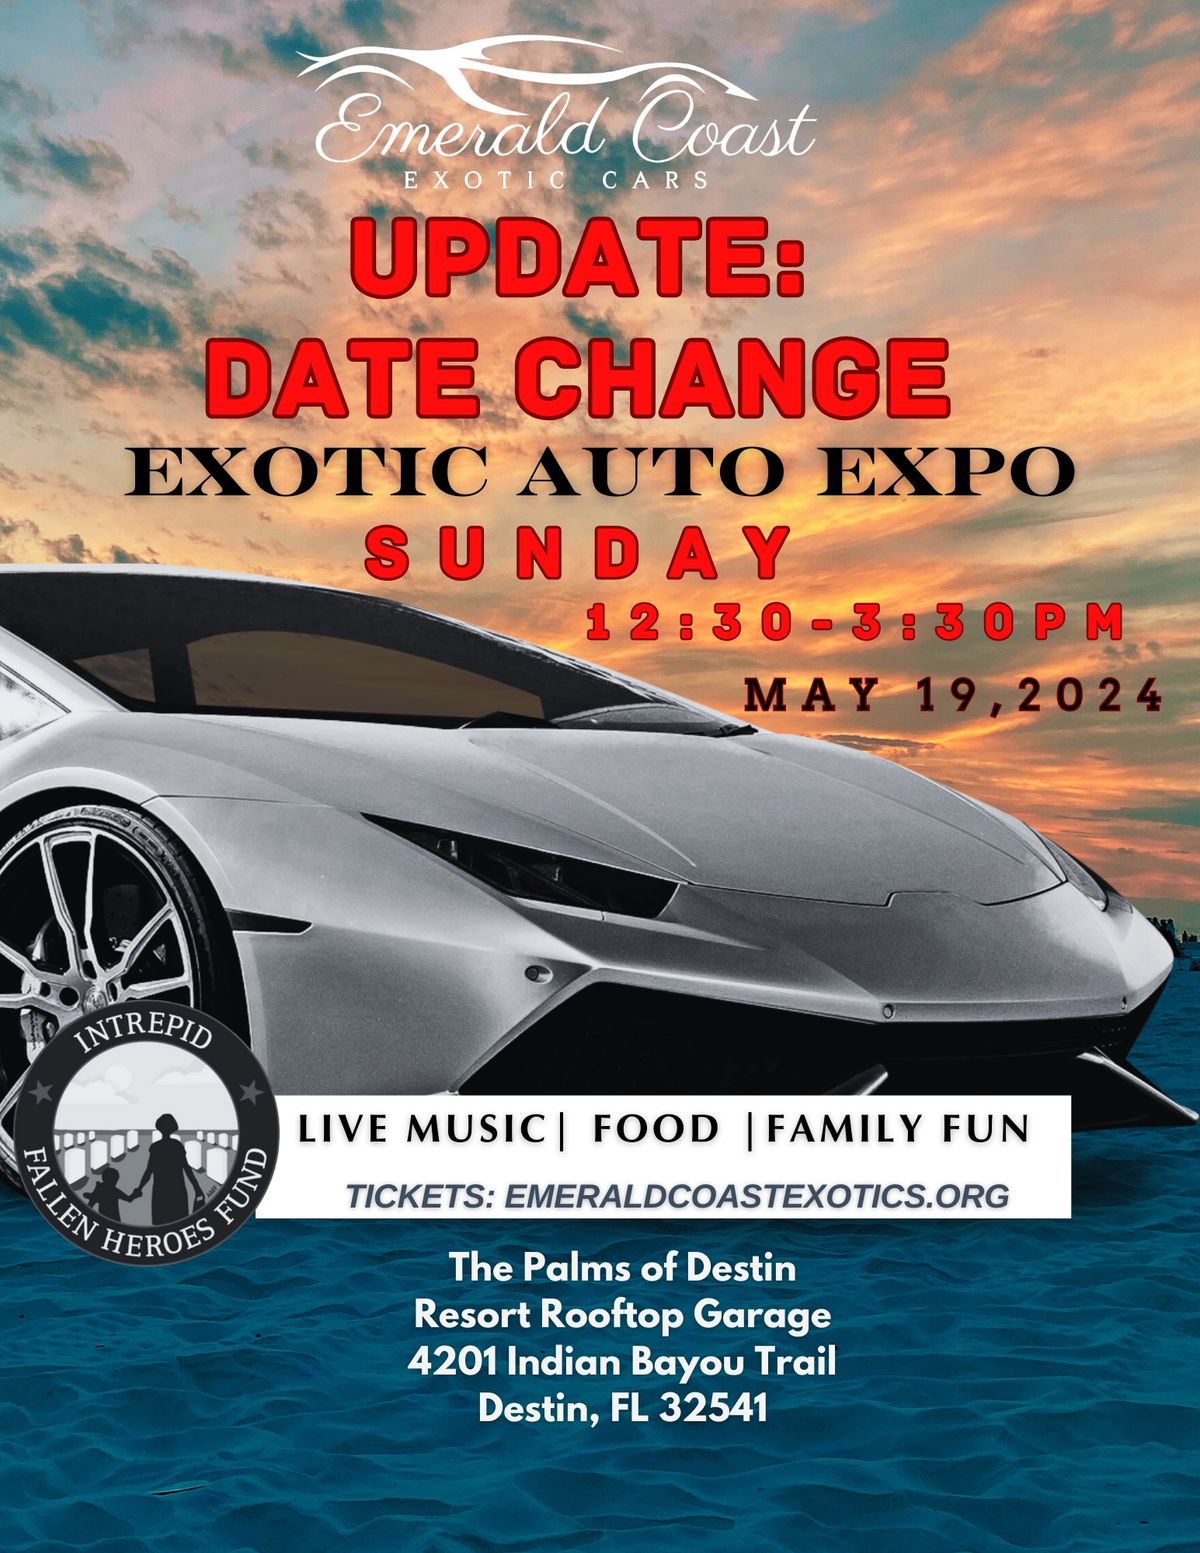 UPDATE : Moved to May 19th -Emerald Coast Exotic Cars 2024 Auto Expo